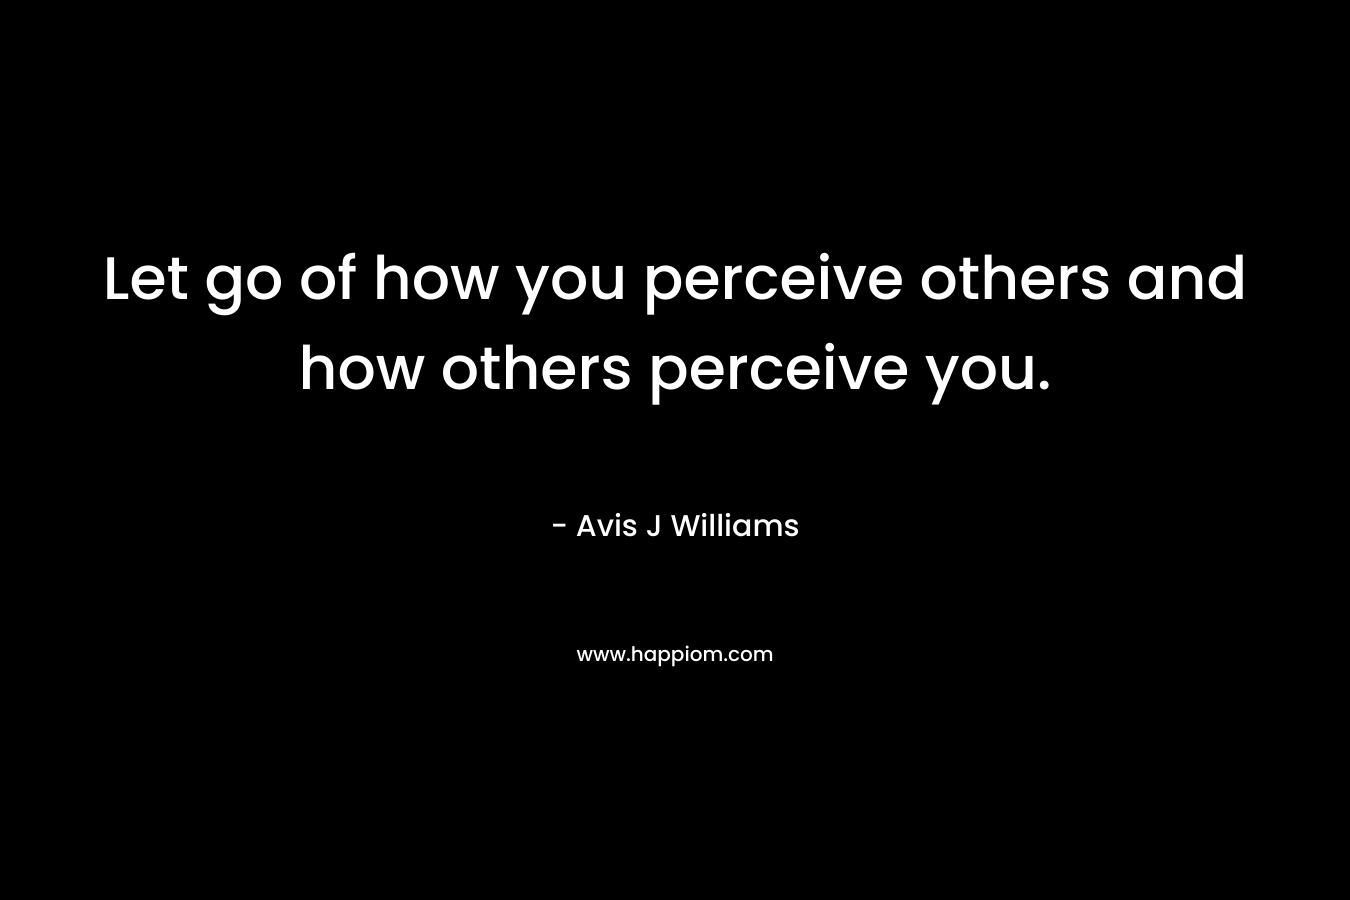 Let go of how you perceive others and how others perceive you.